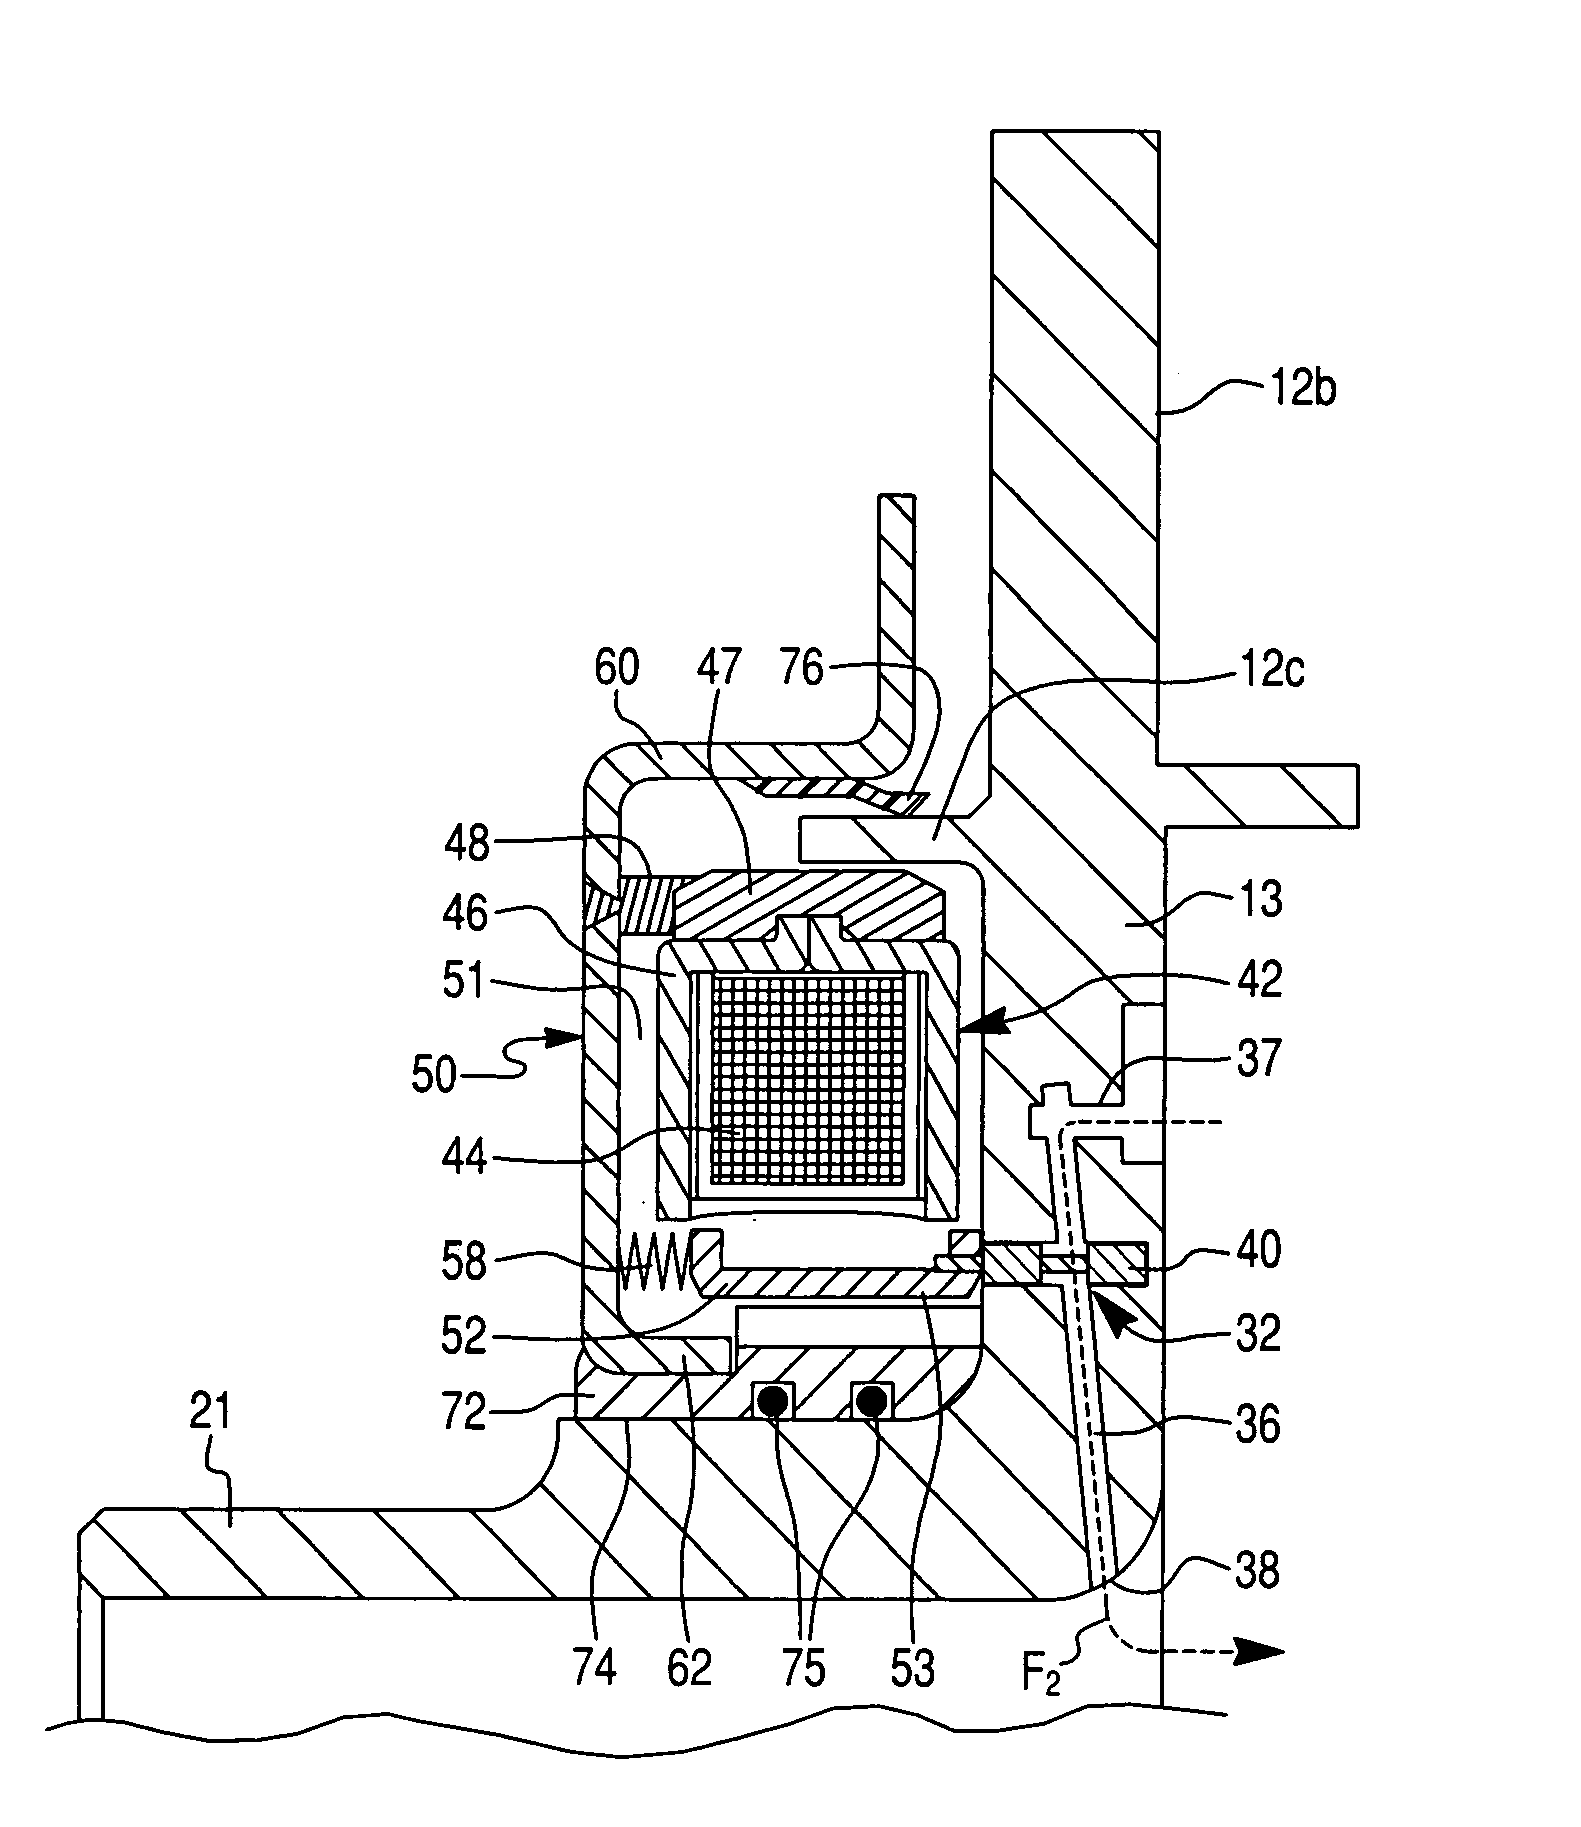 Electro-magnetic actuator for torque coupling with variable pressure-control spool valve